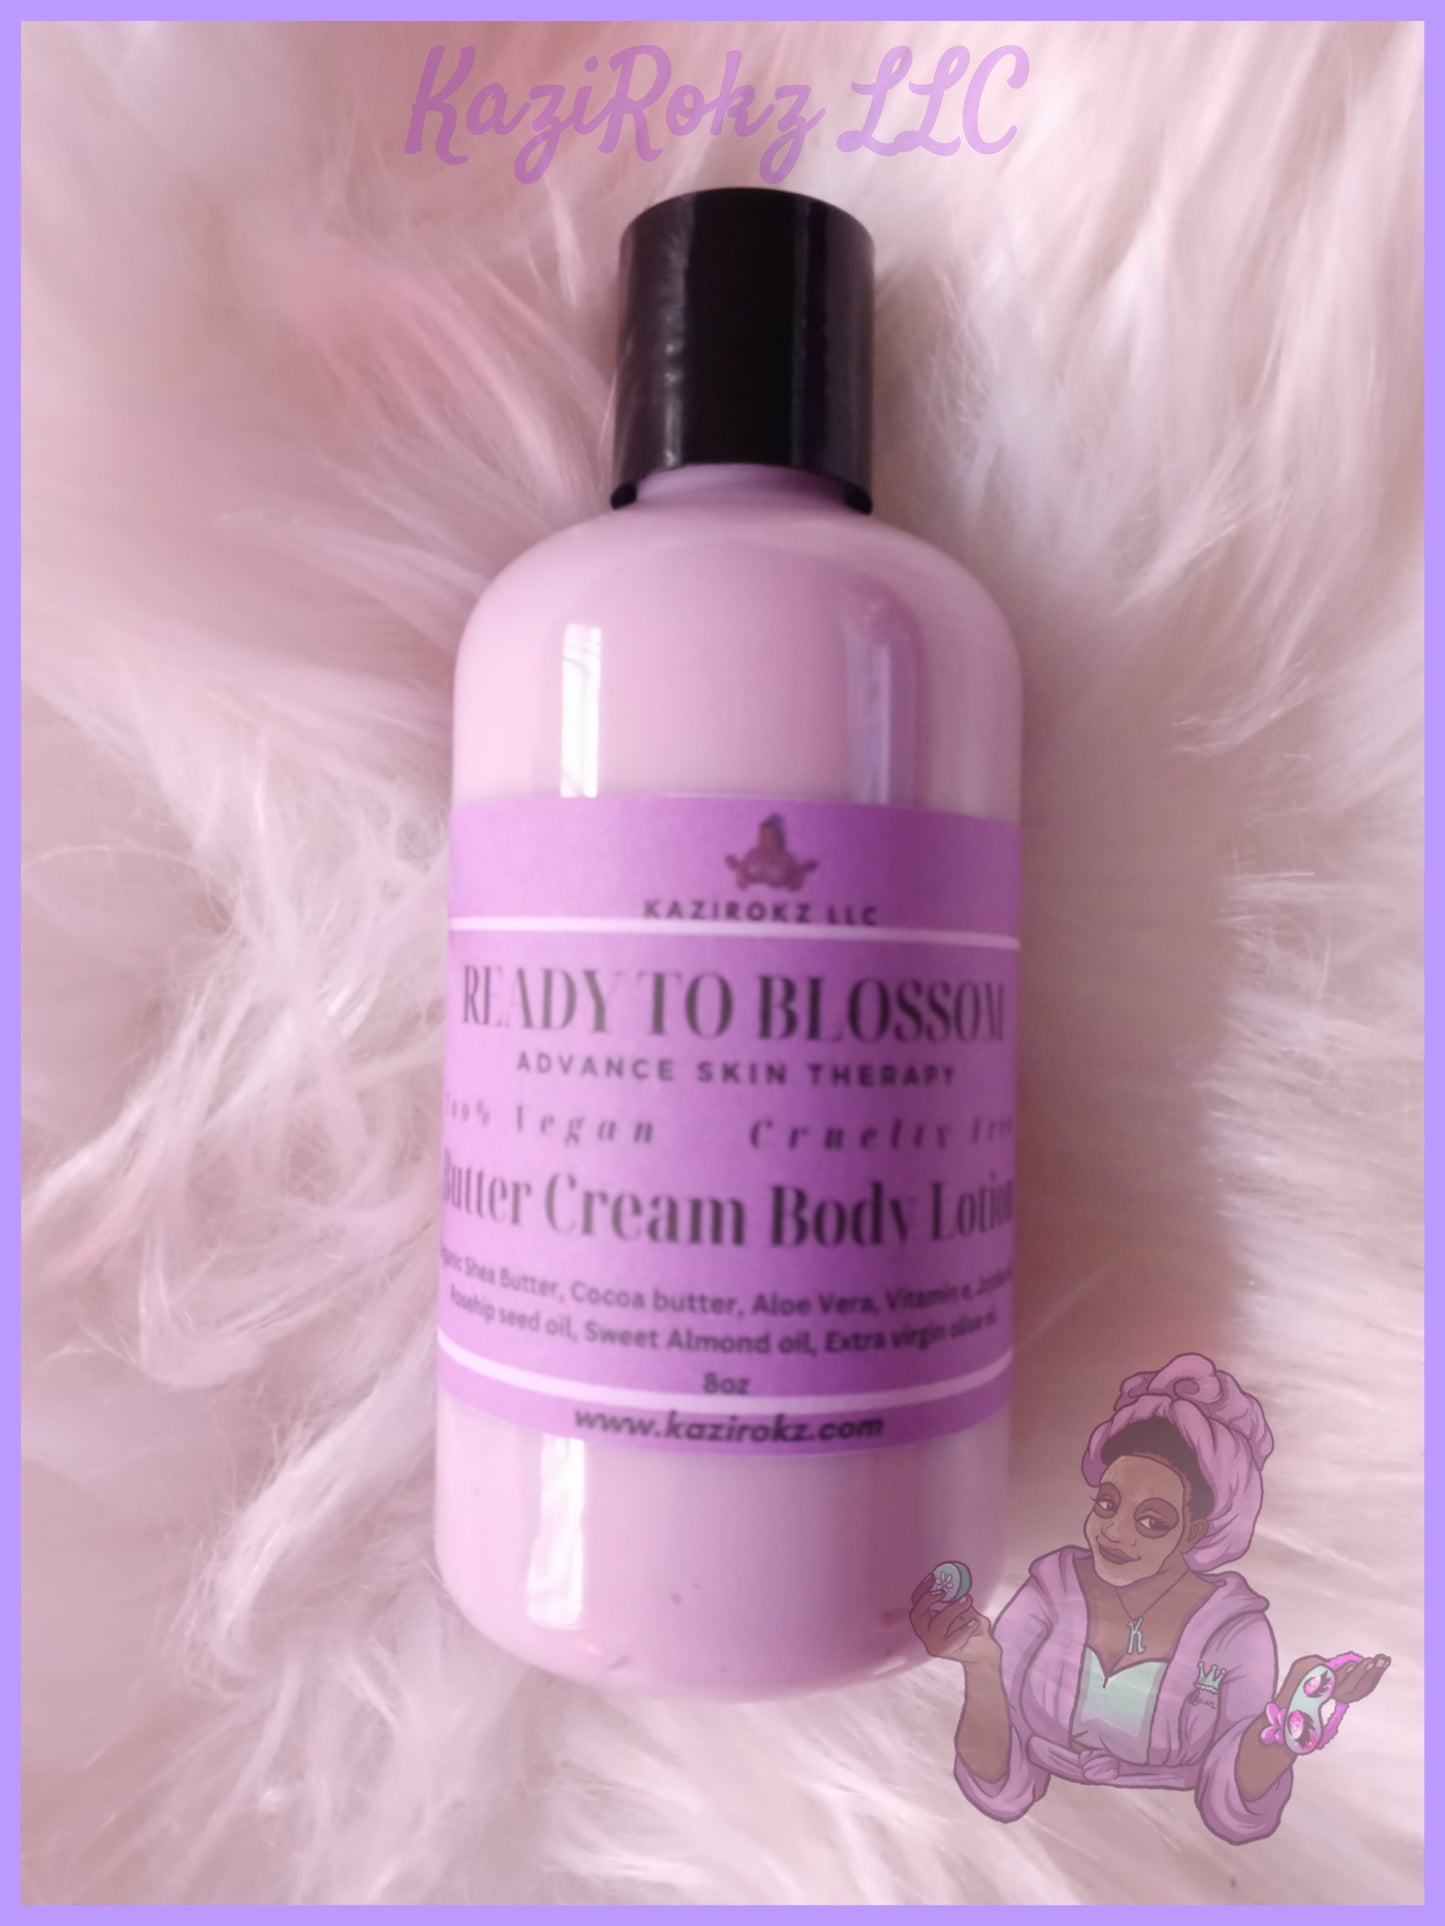 READY TO BLOSSOM Butter Cream Body Lotion 8oz. (100% vegan/ cruelty free ) Yoni Butter Cream, Skin hydrator and moisturizer. Tightens and firms your skin.